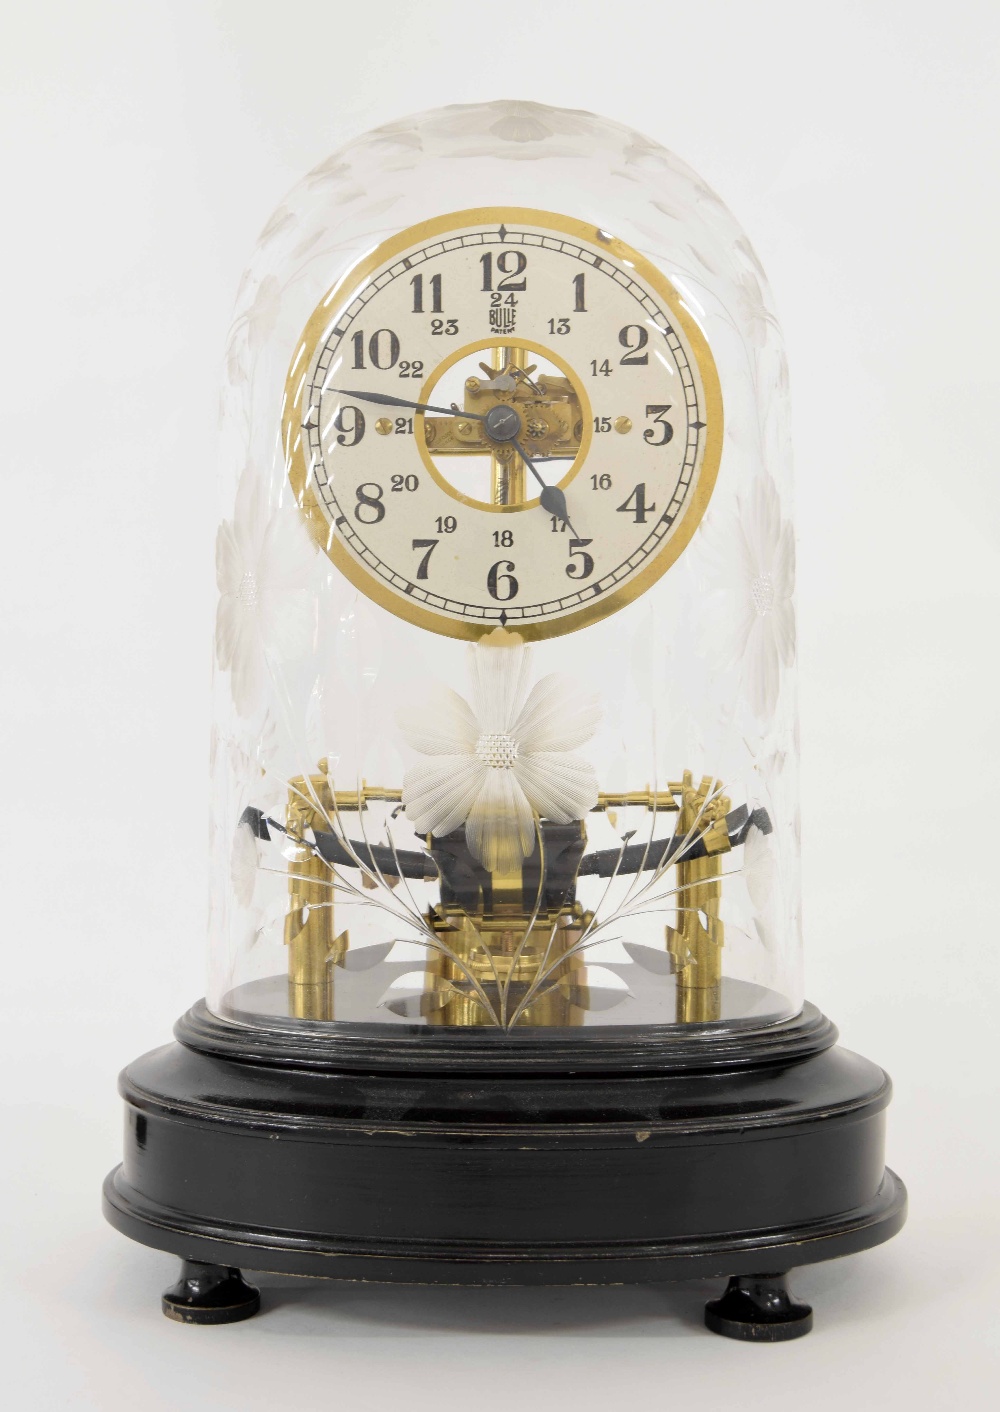 Bulle Patent electric mantel clock, the 5" silvered twenty-four hour dial with skeletonised